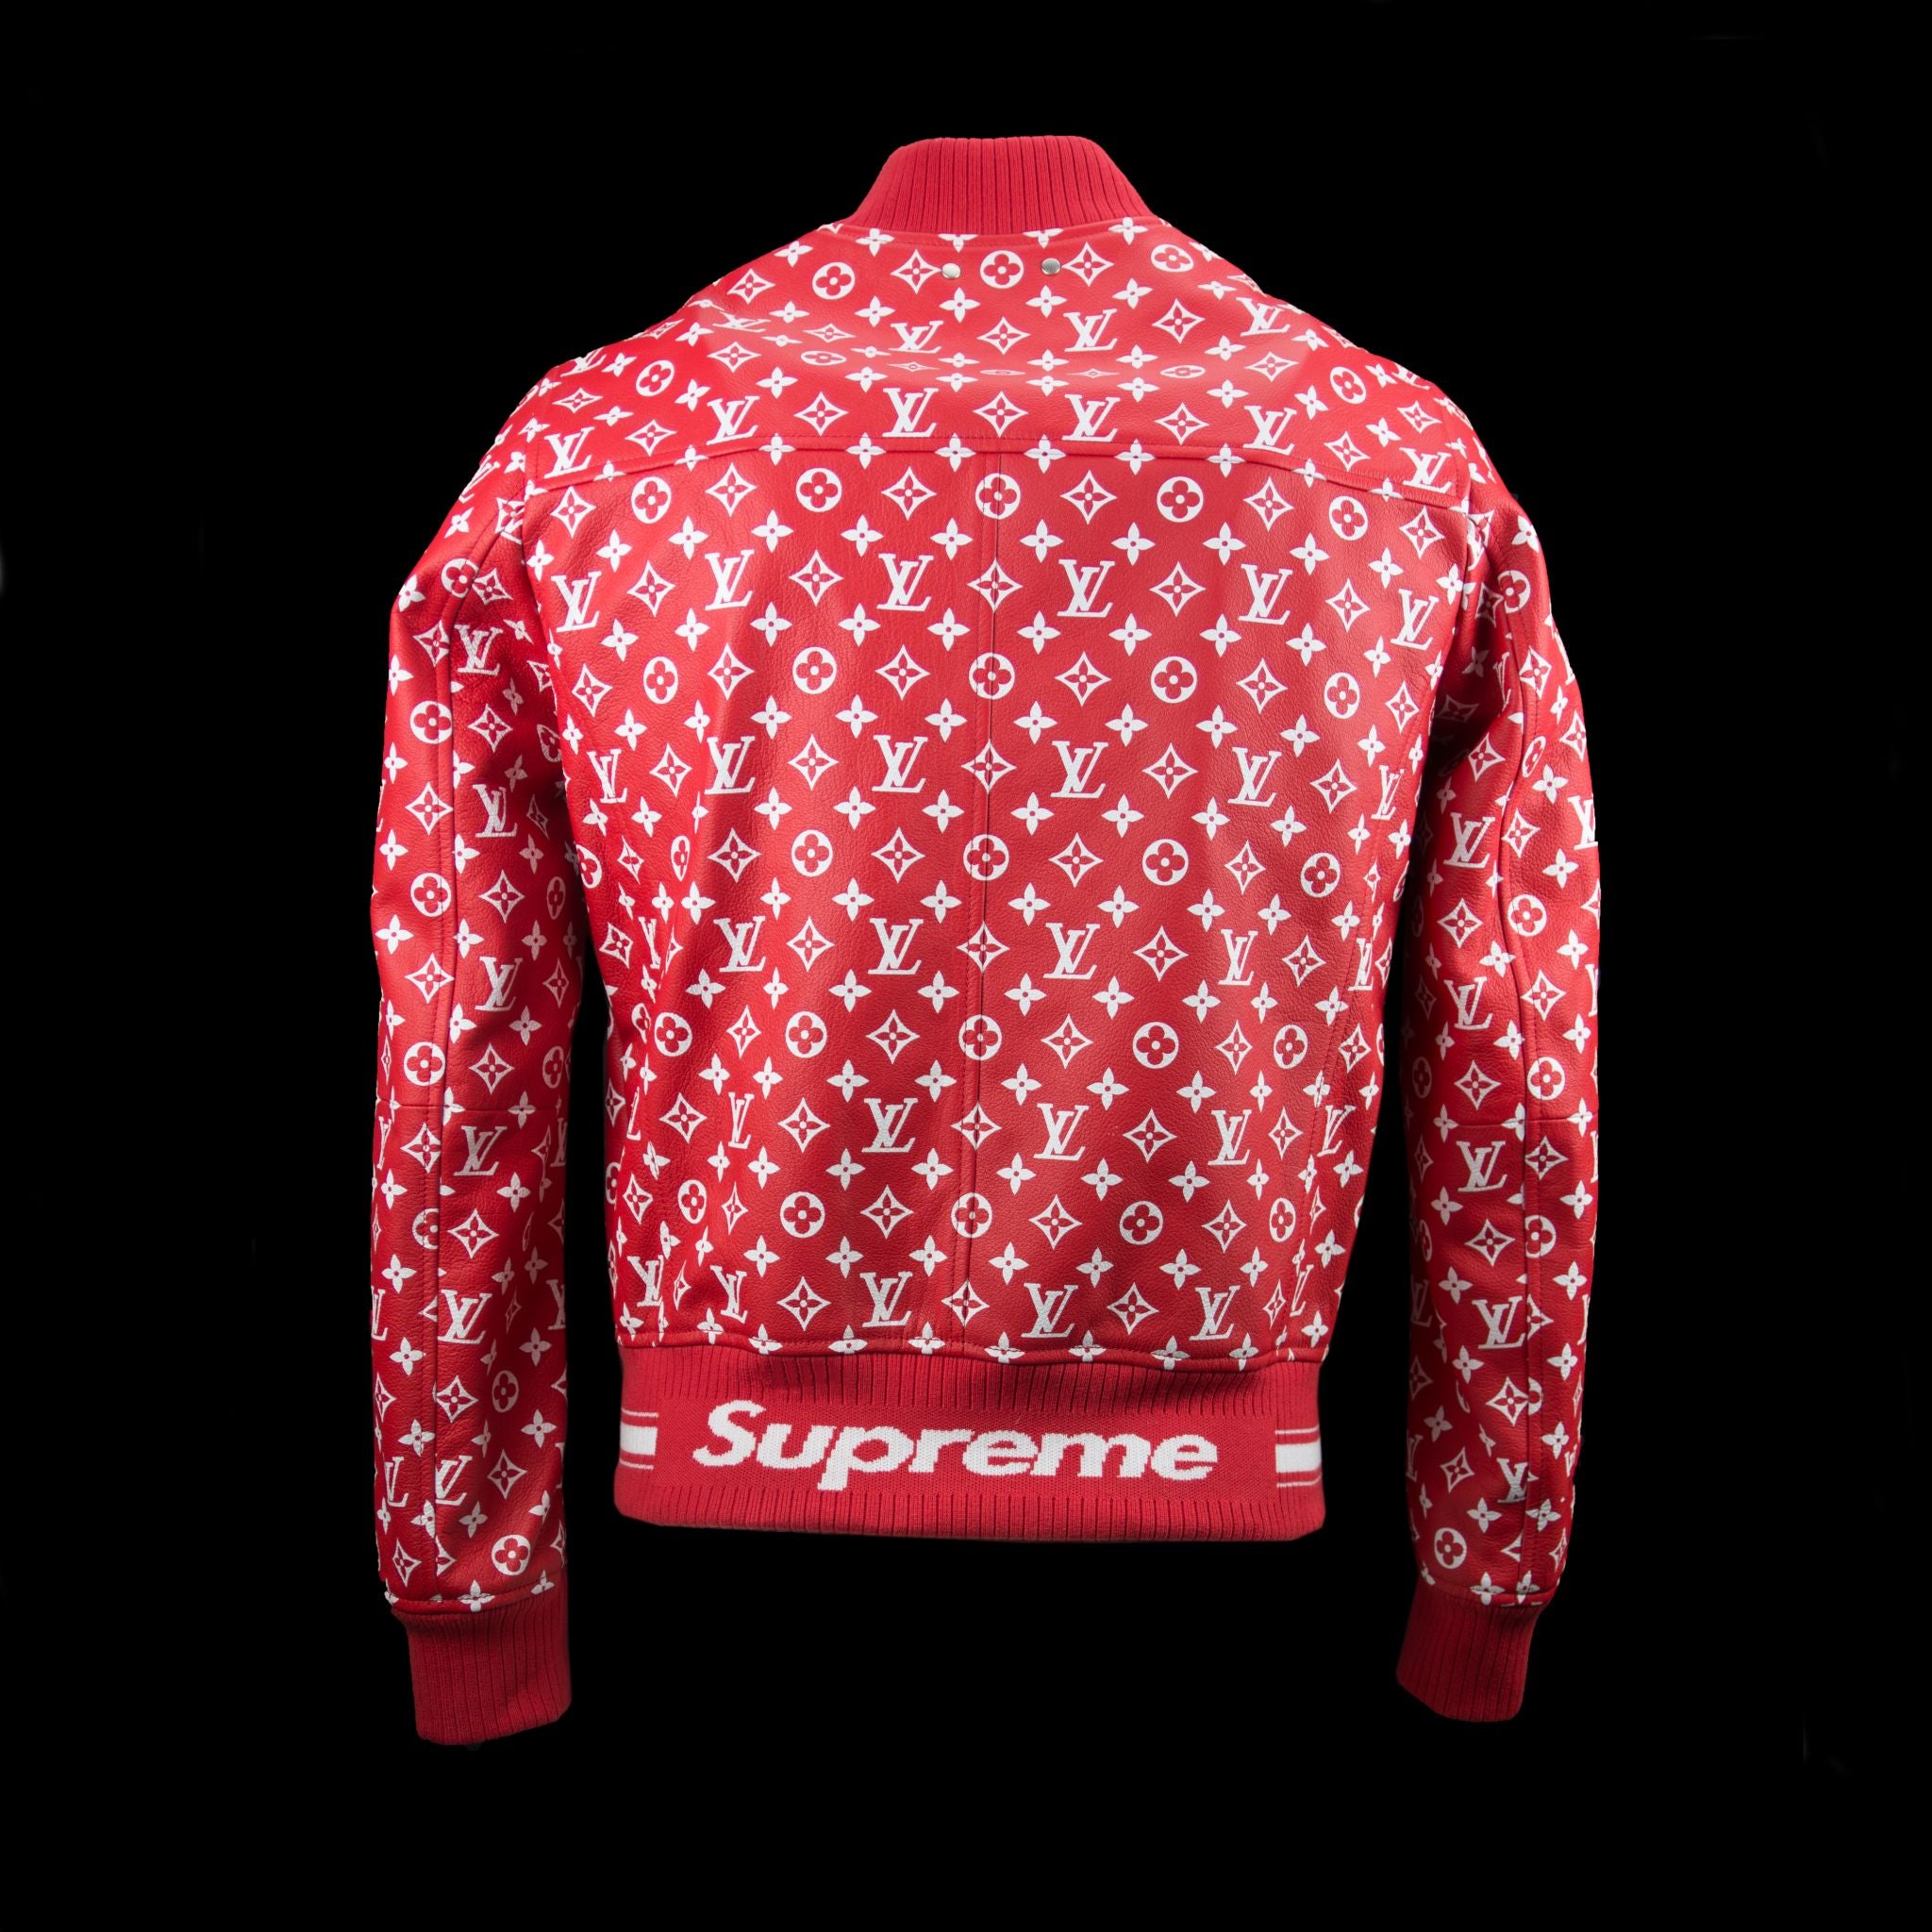 Louis Vuitton By Supreme Leather Bomber Jacket - looking at toys